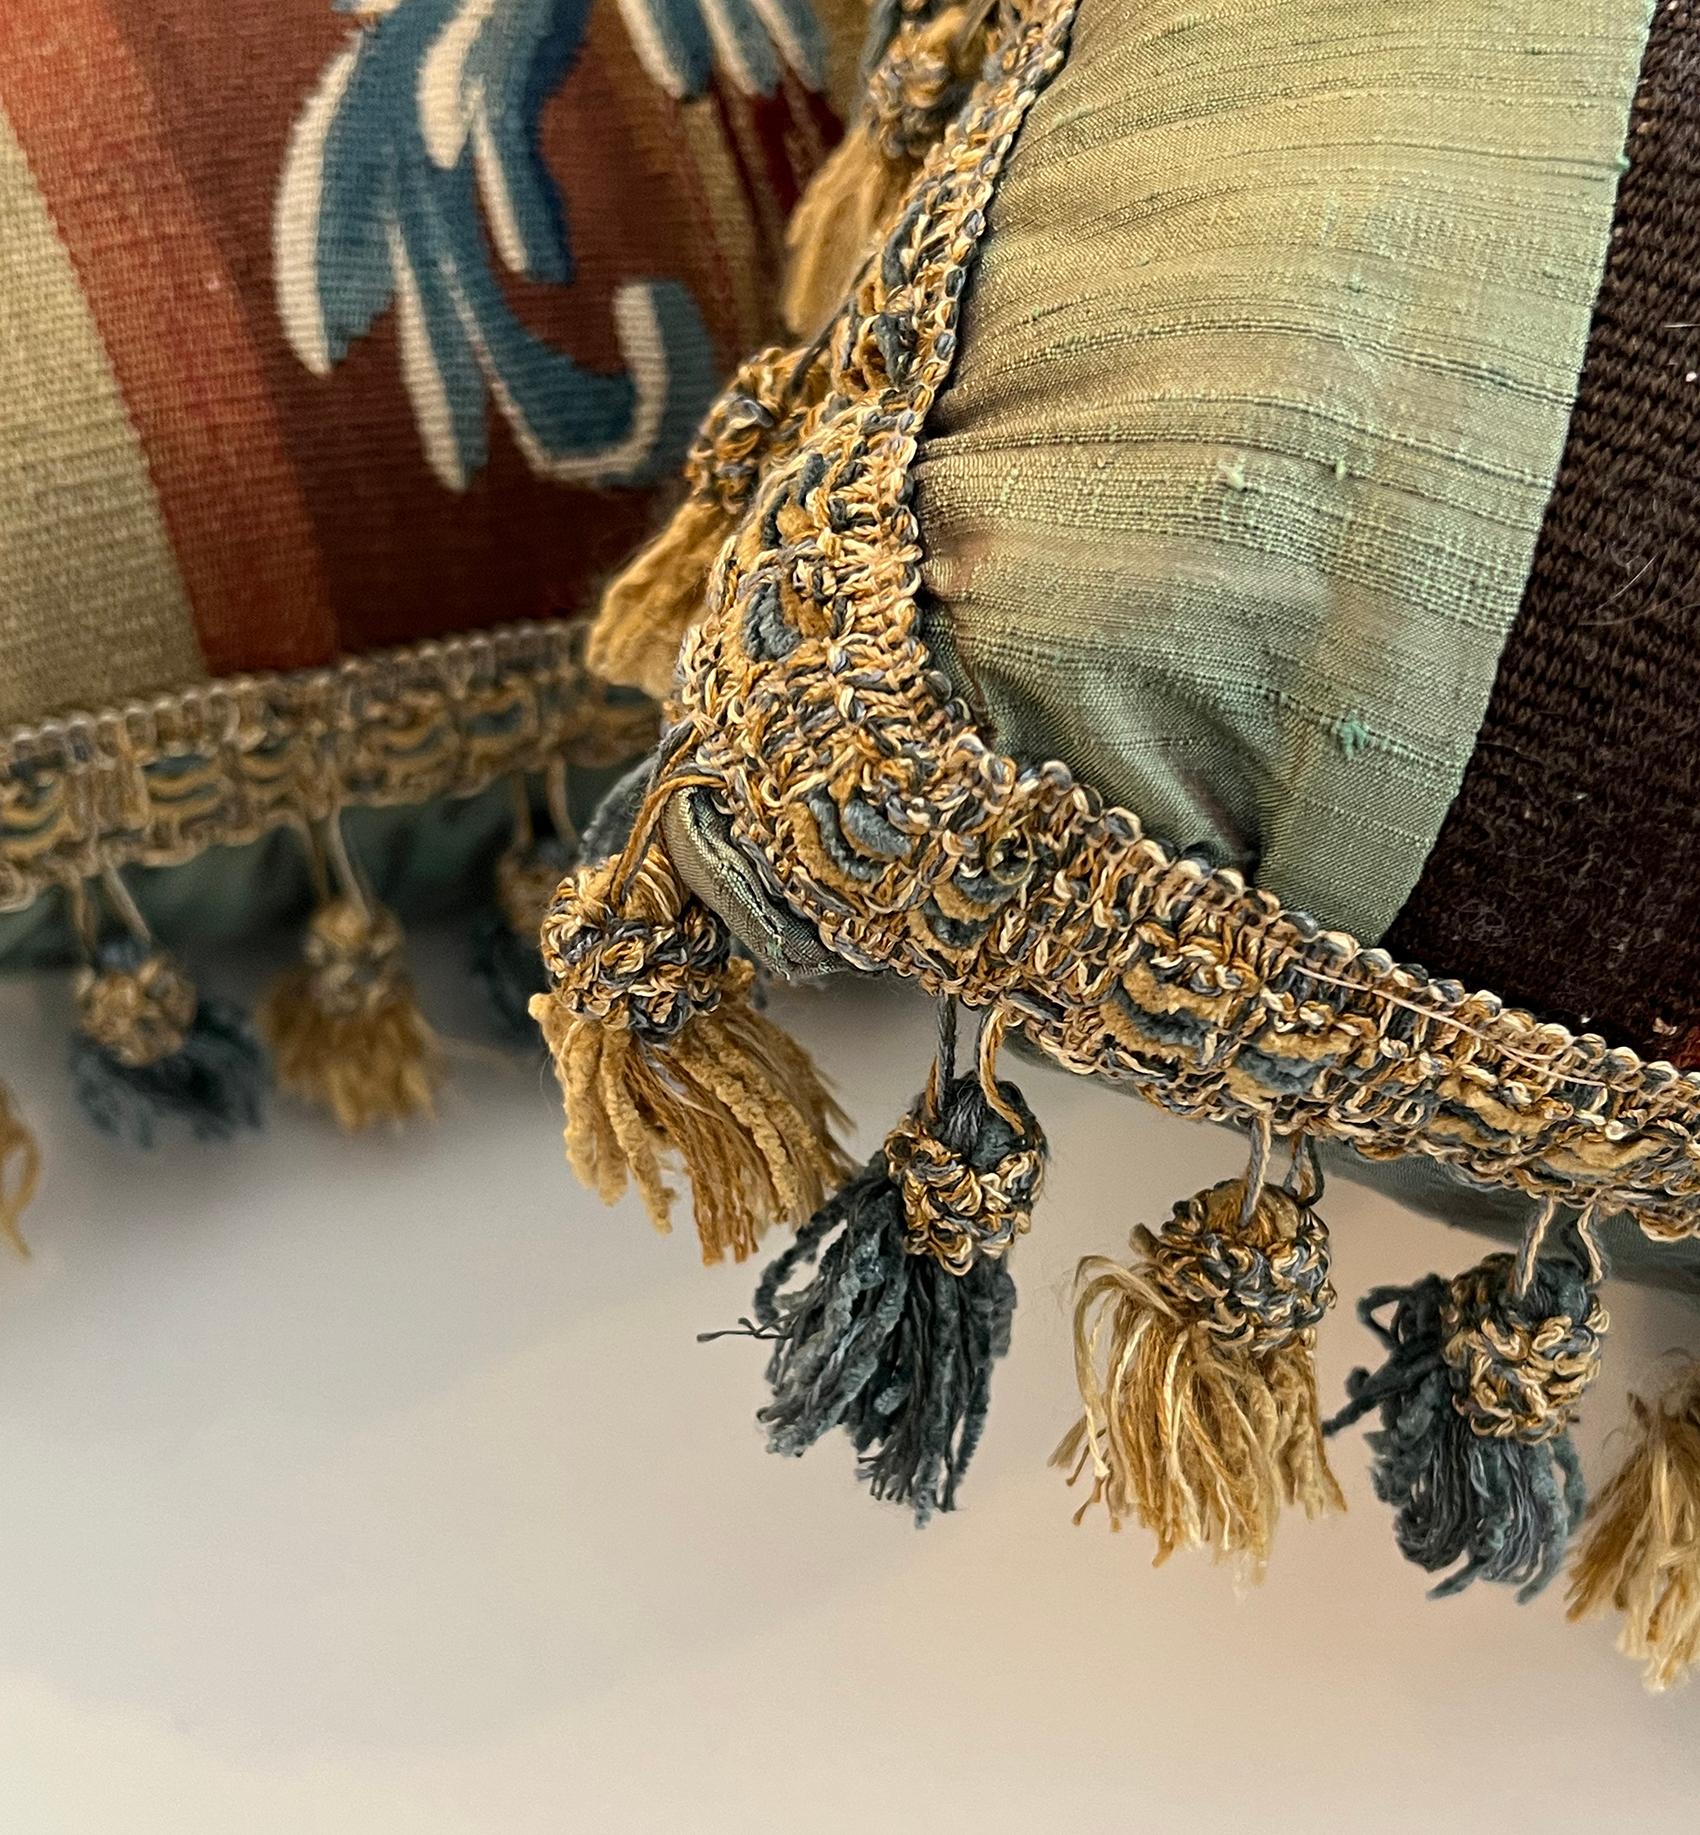 Pair of Antique 18th Century European Tapestry Pillows with Tassels For Sale 1